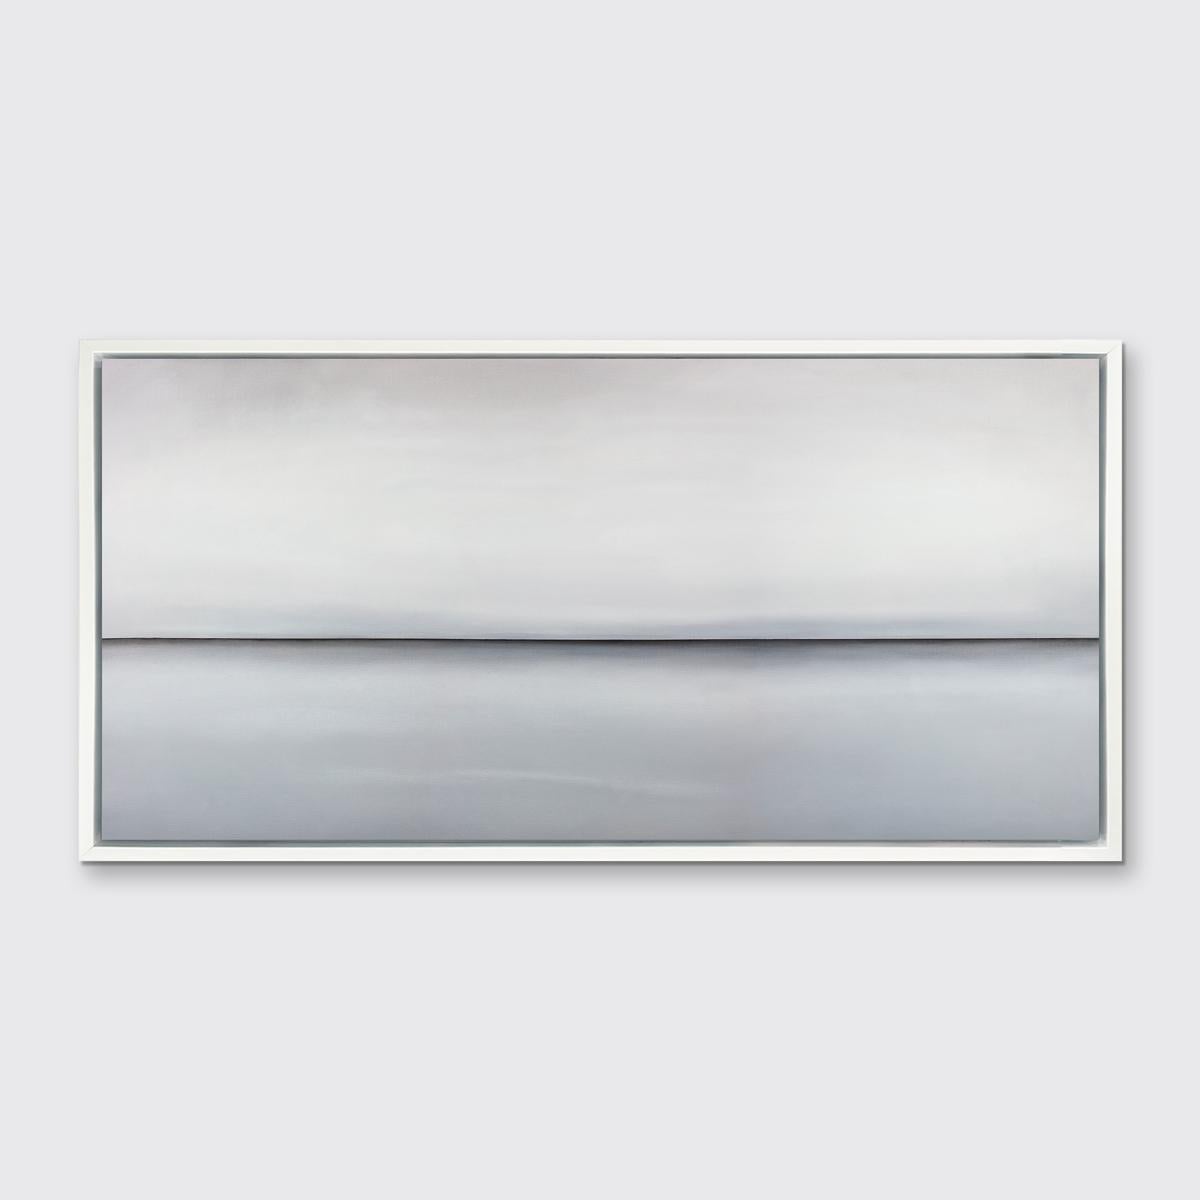 Tony Iadicicco Abstract Print - "Clear View" Framed Limited Edition Giclee Print, 36" x 72"